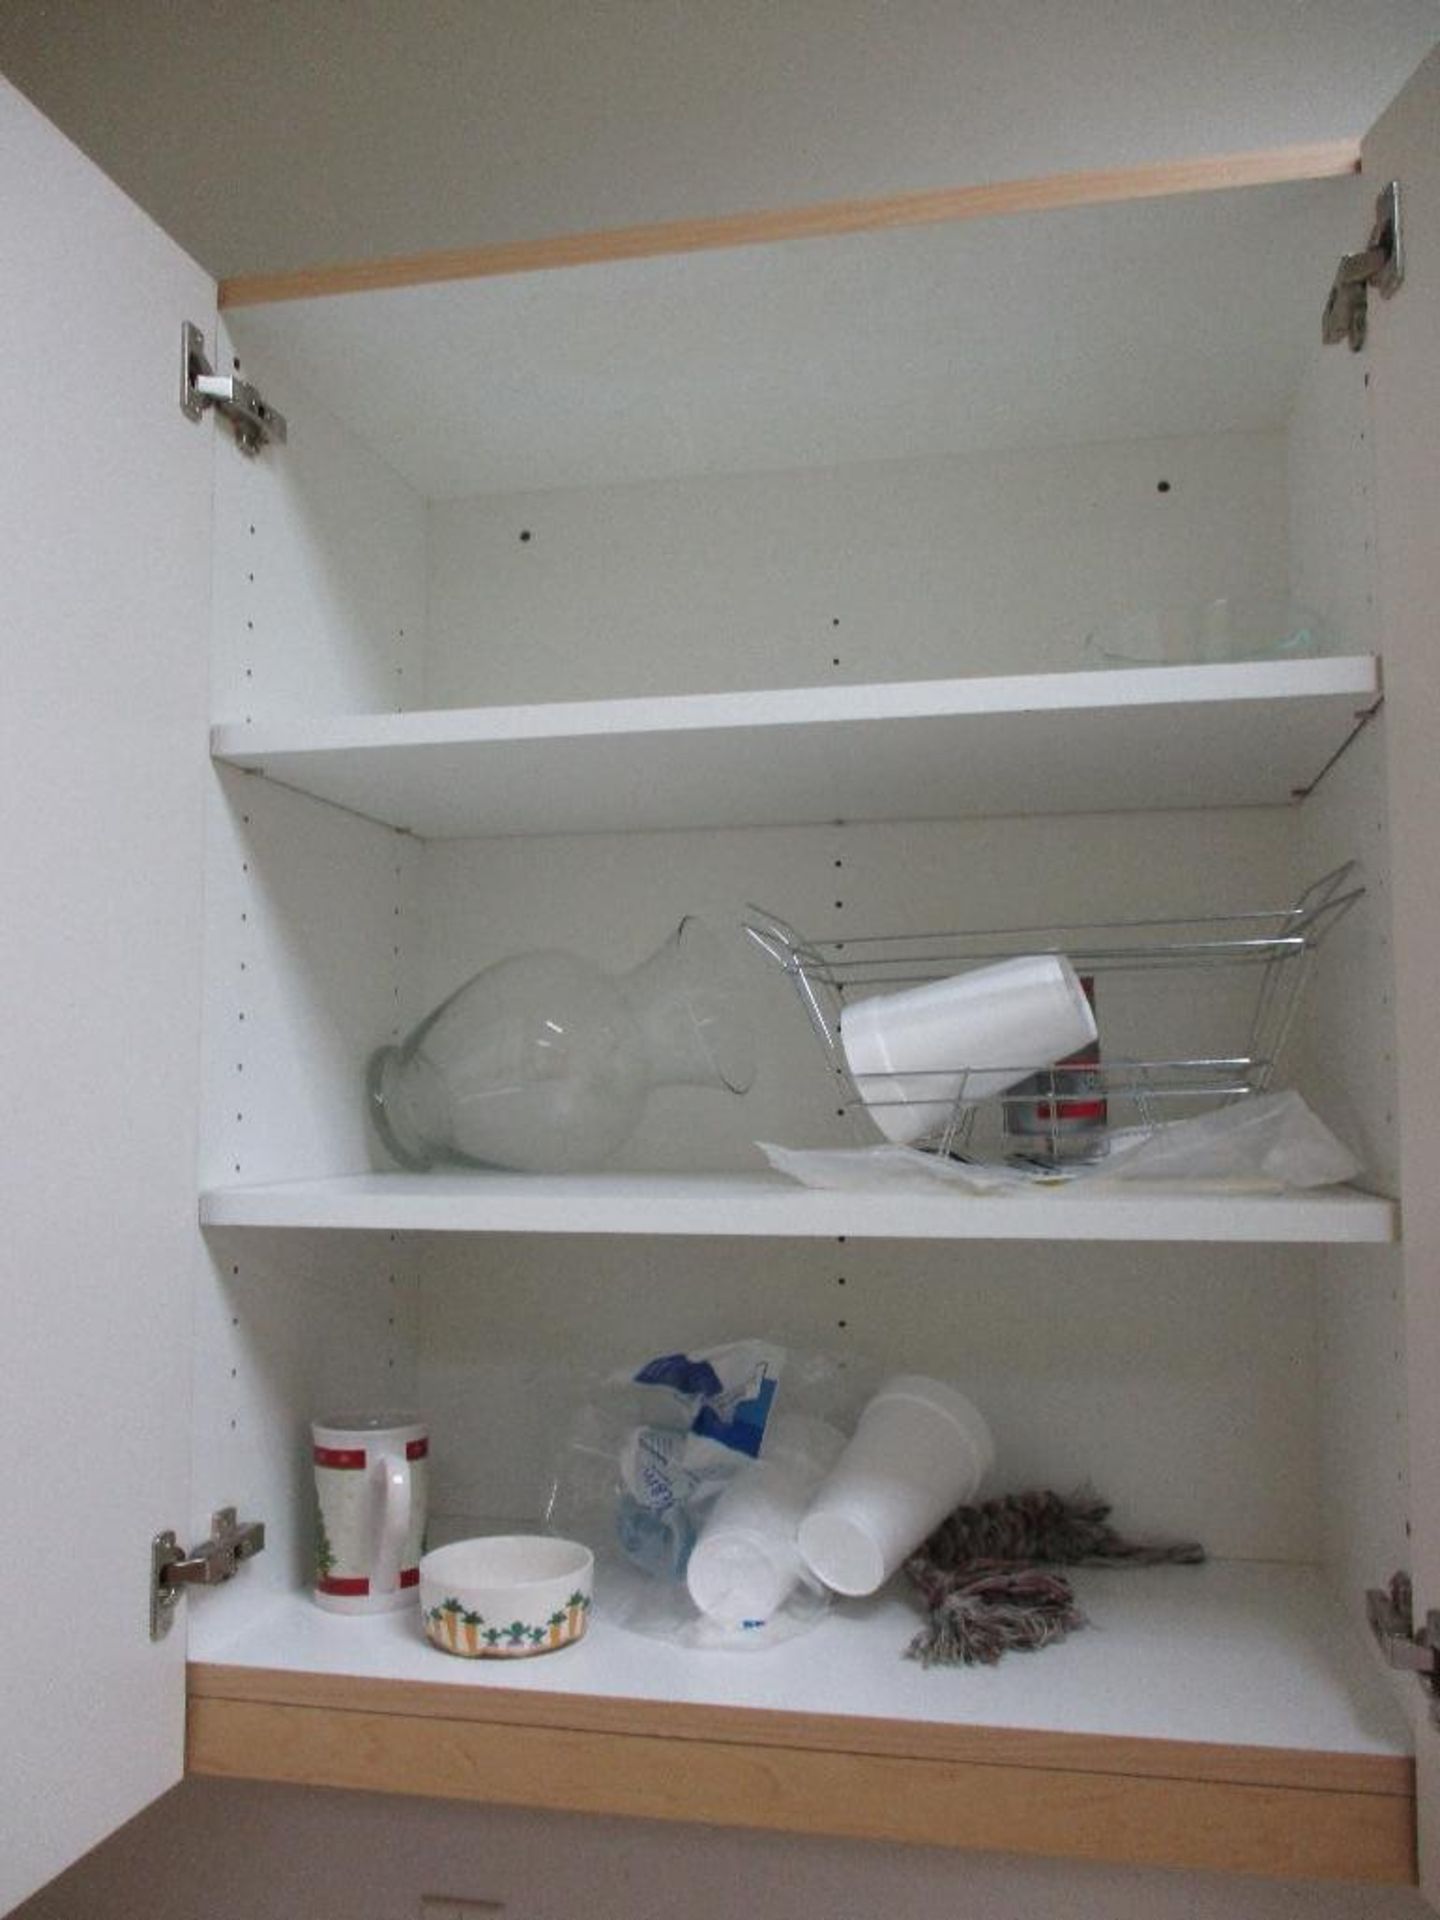 Contents of all cabinets and counters in this area and Large sink( disconnect water and cap to code) - Image 15 of 15